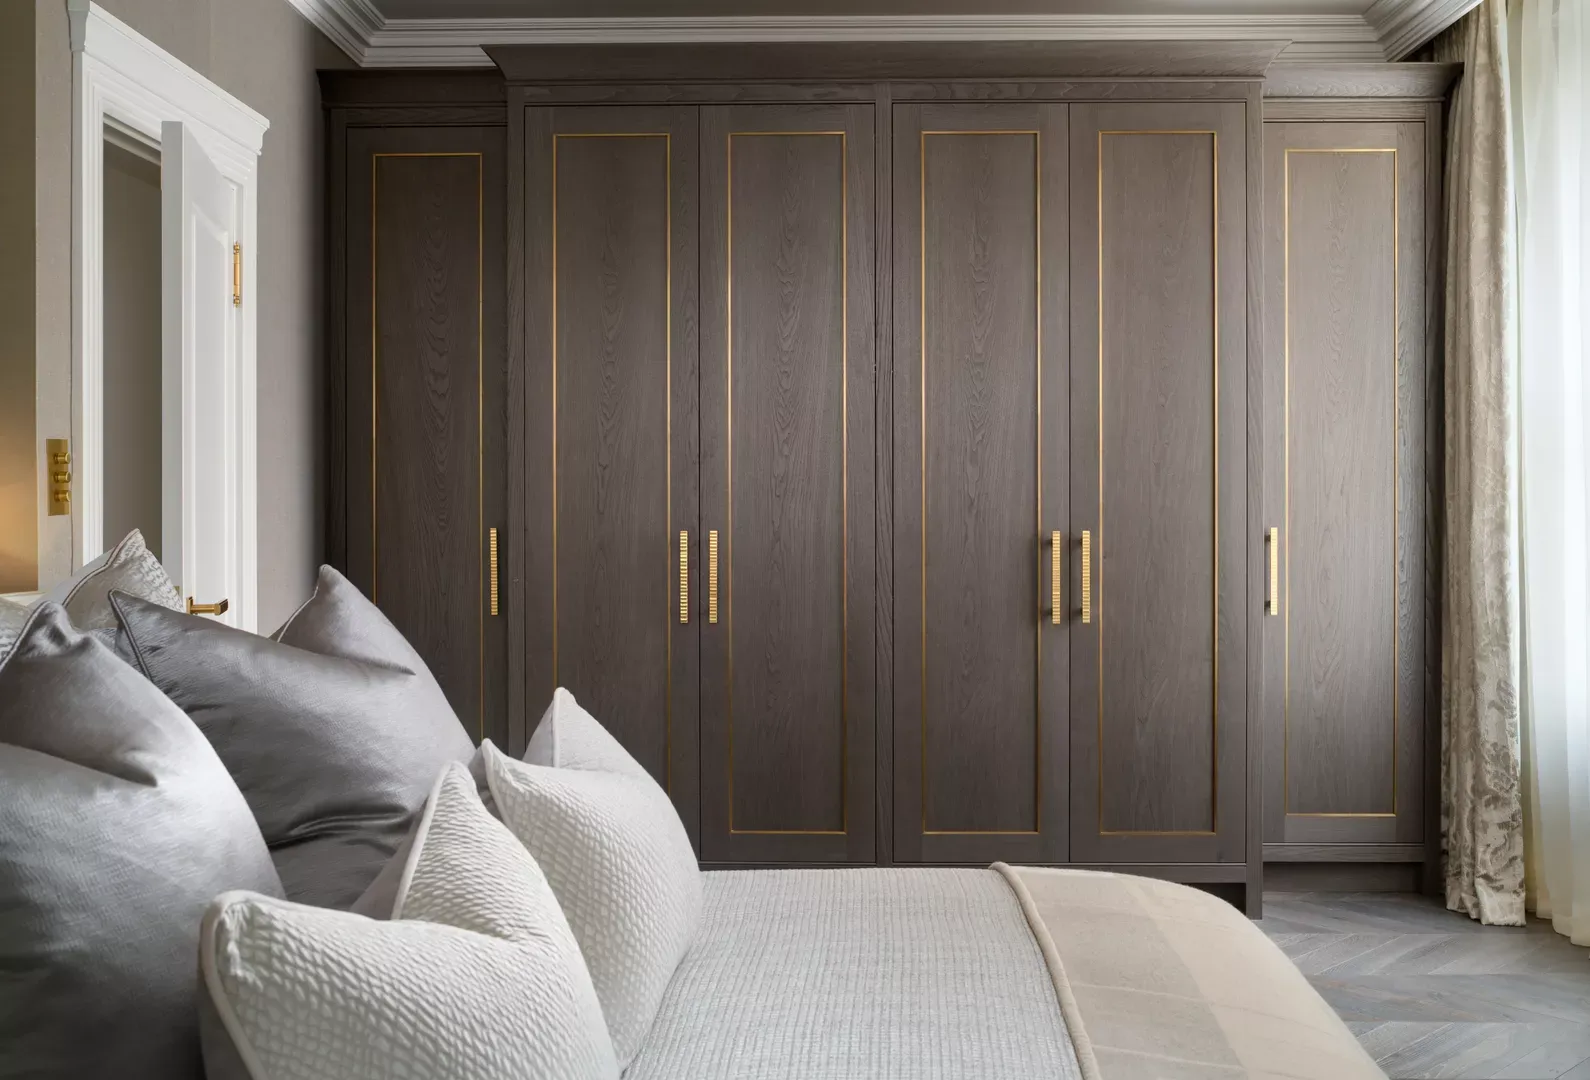 Belgravia Apartment Bedroom with Harrison Lever Handle (LV1105) and Harlyn Cabinet Handle (CH1083) in Brushed Brass Waxed - BBW